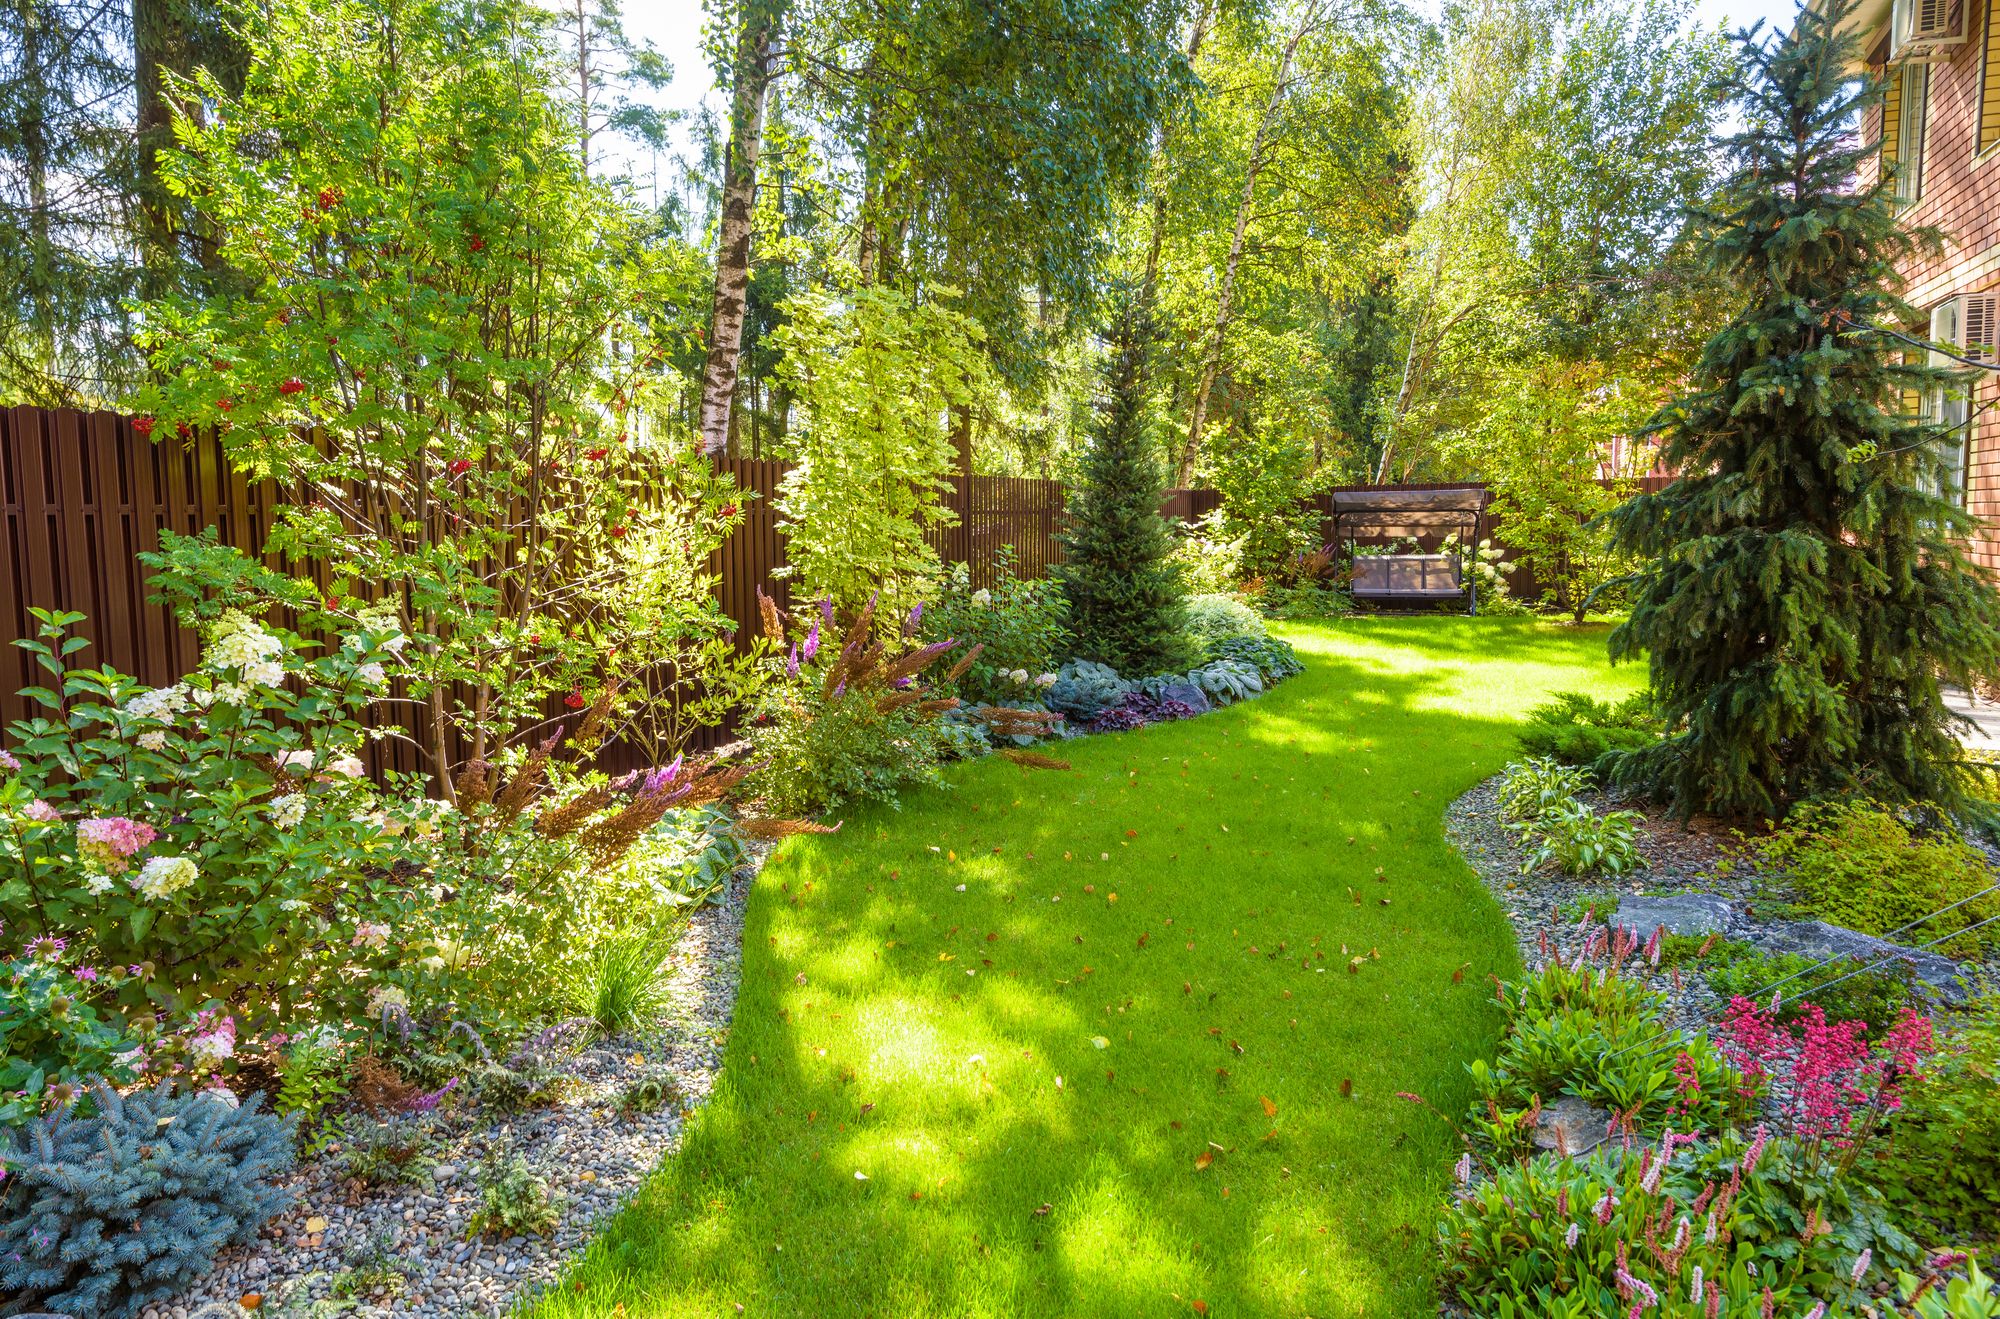 7 Landscaping Secrets To Make Your Yard Stunning